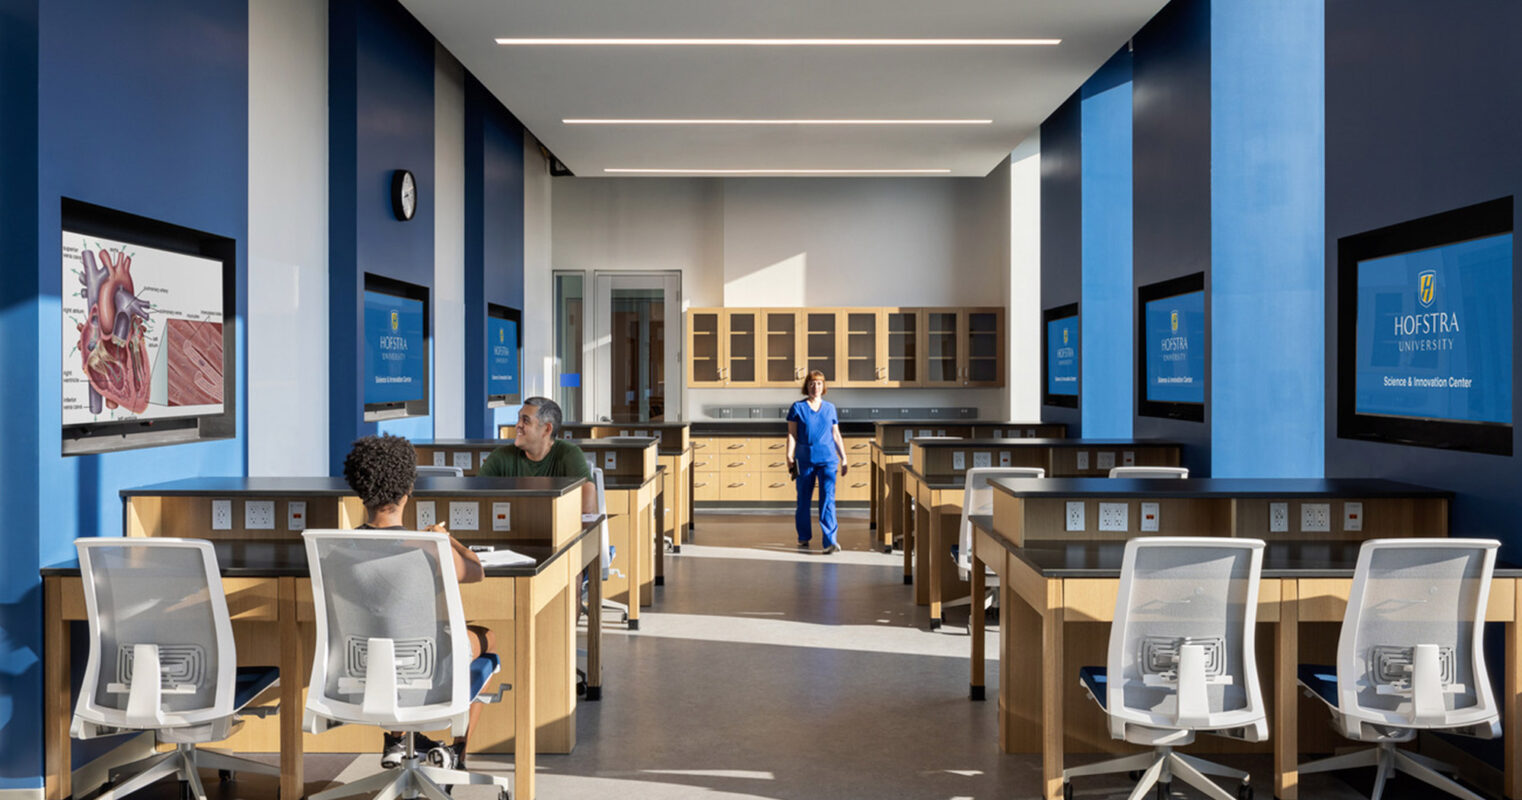 Interior lab space within Hofstra Science & Innovation Center